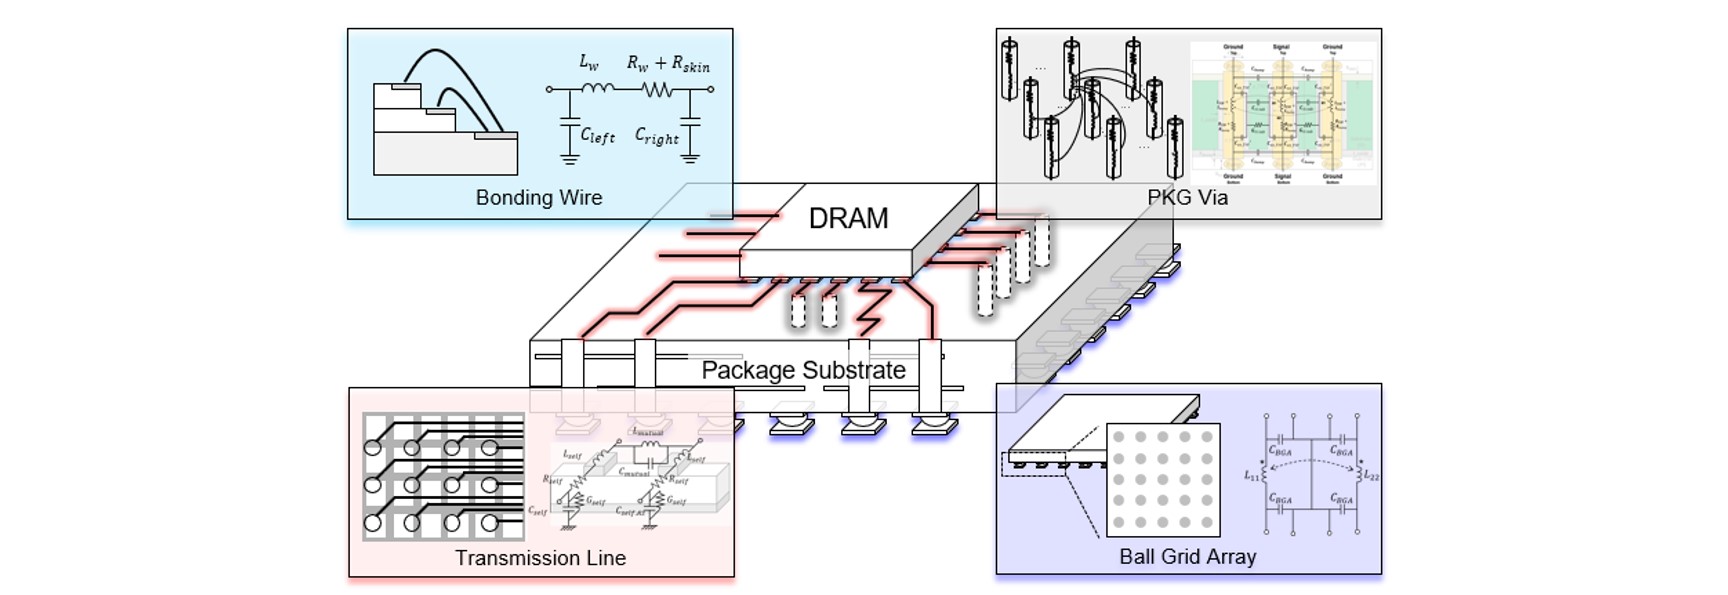 Modeling of DRAM Package Component 이미지